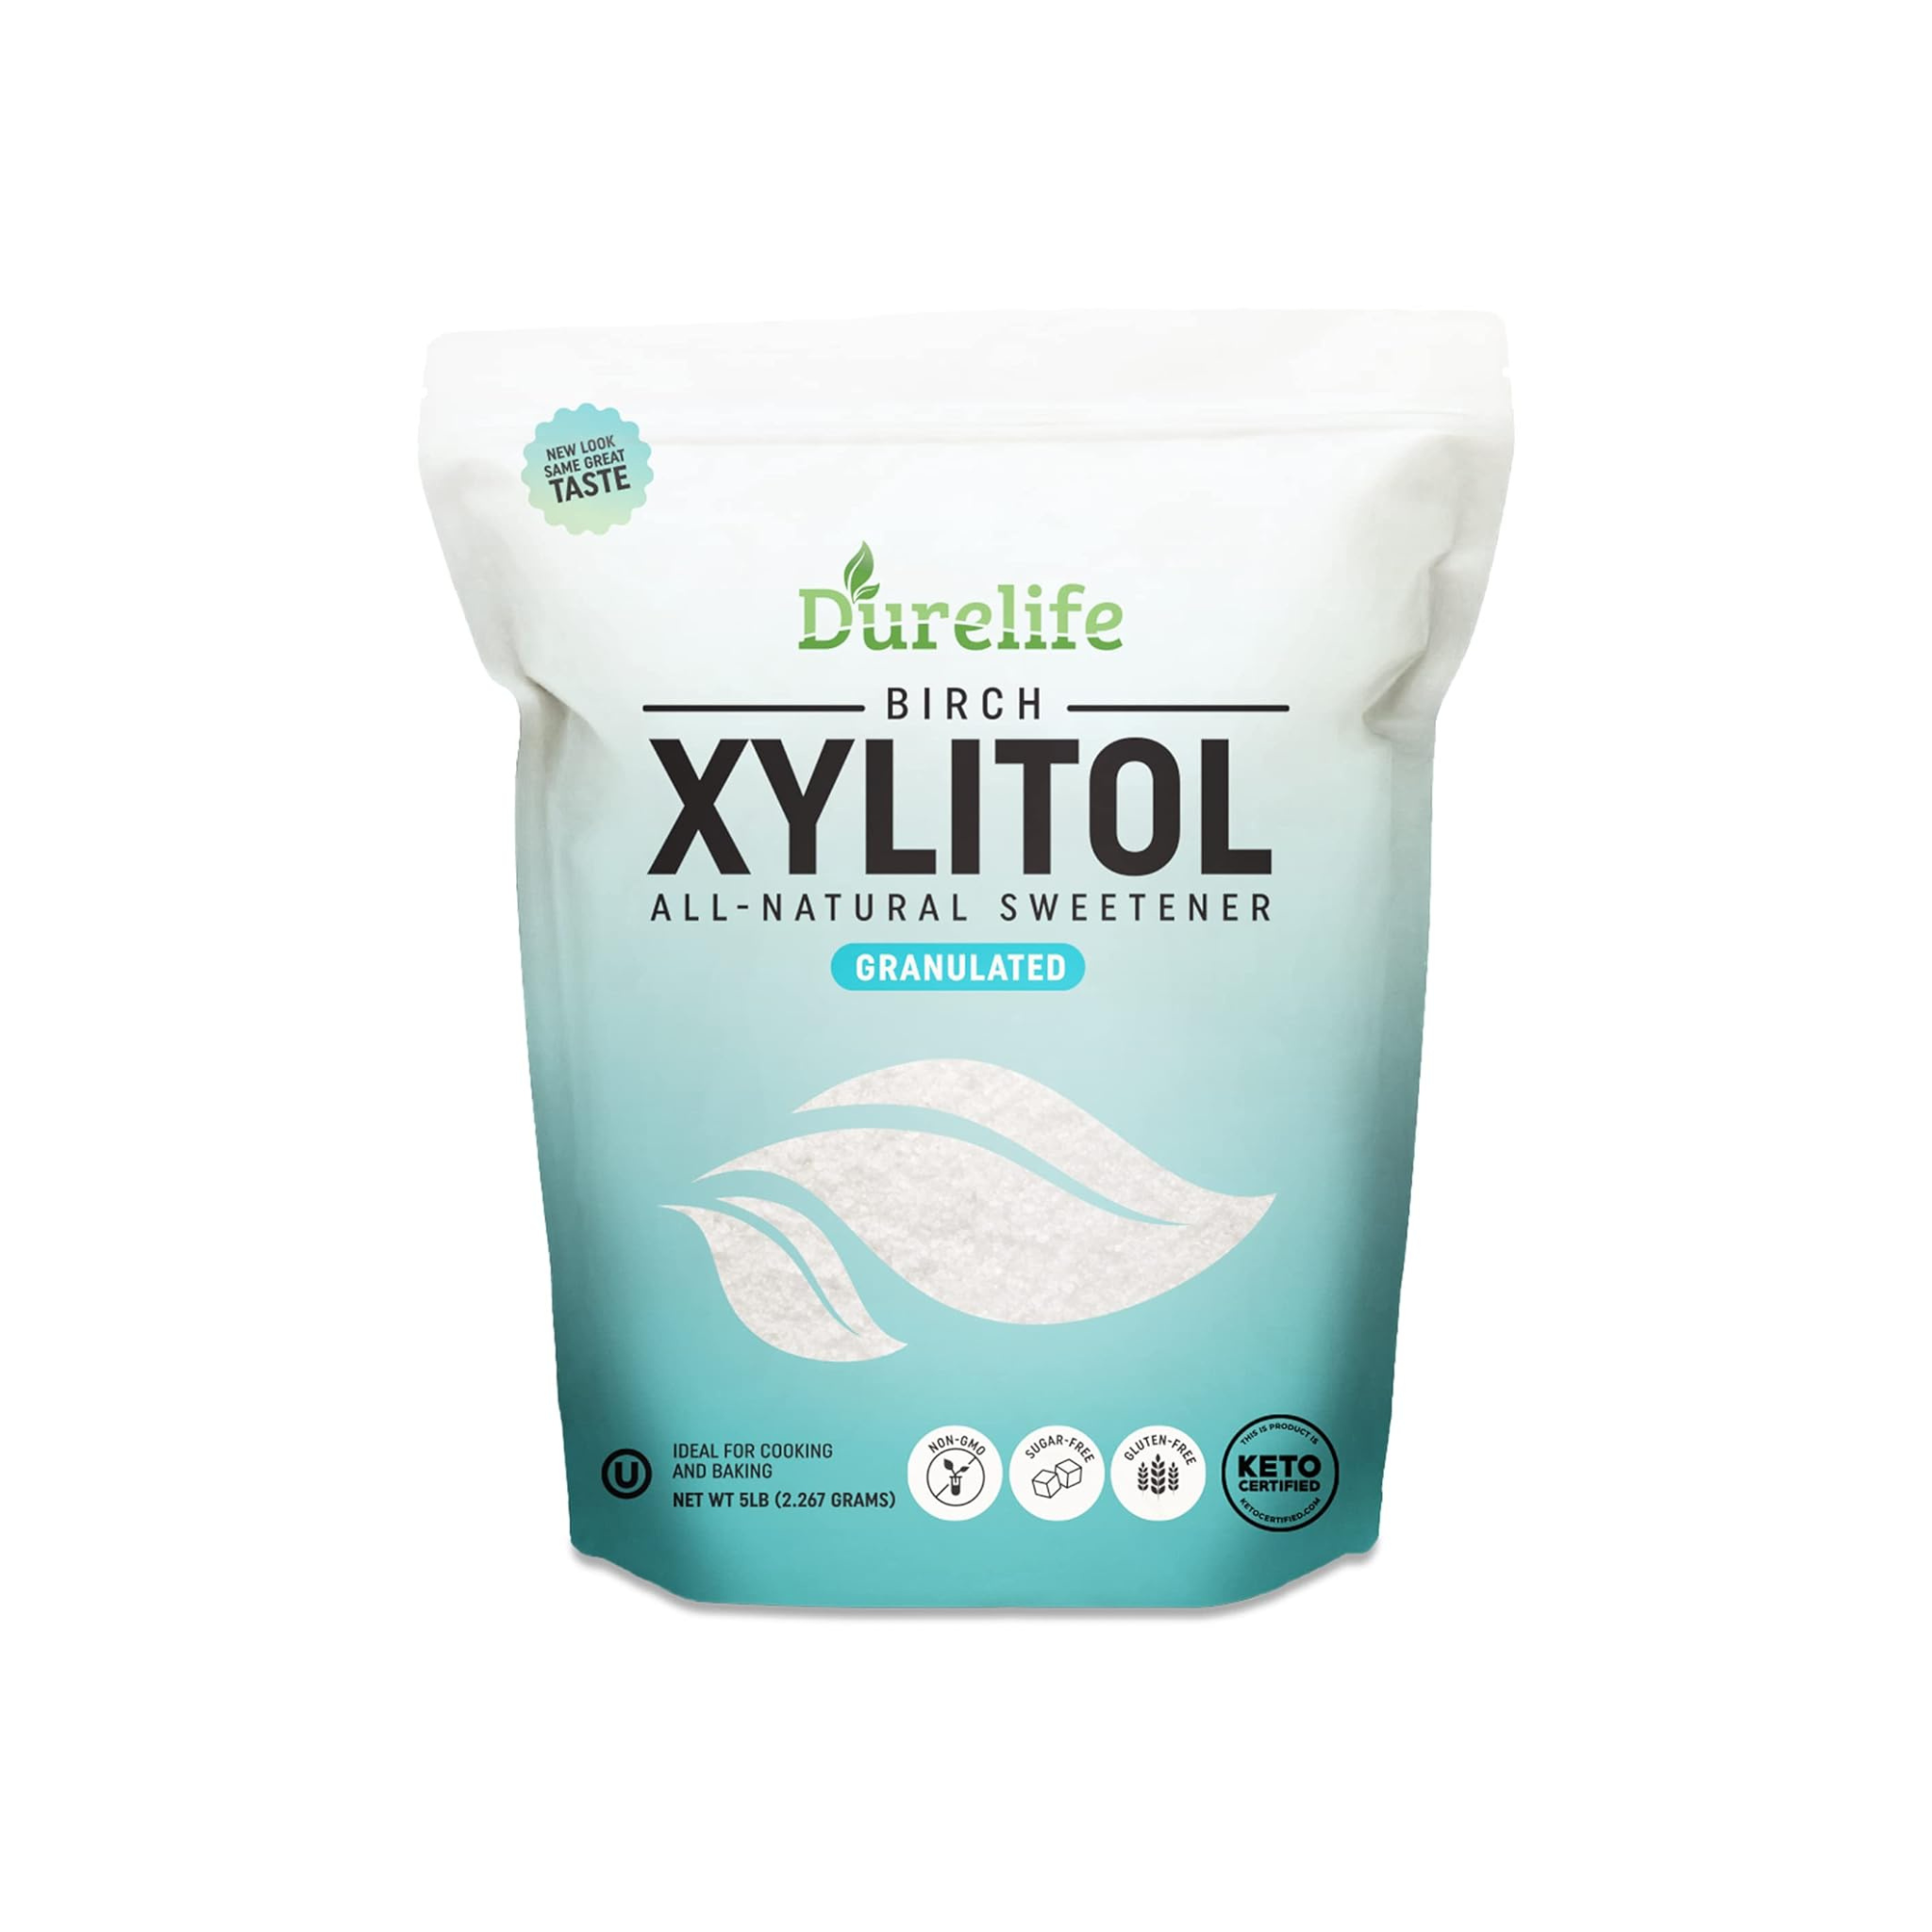 Save up to 65% Durelife Pure Birch Xylitol